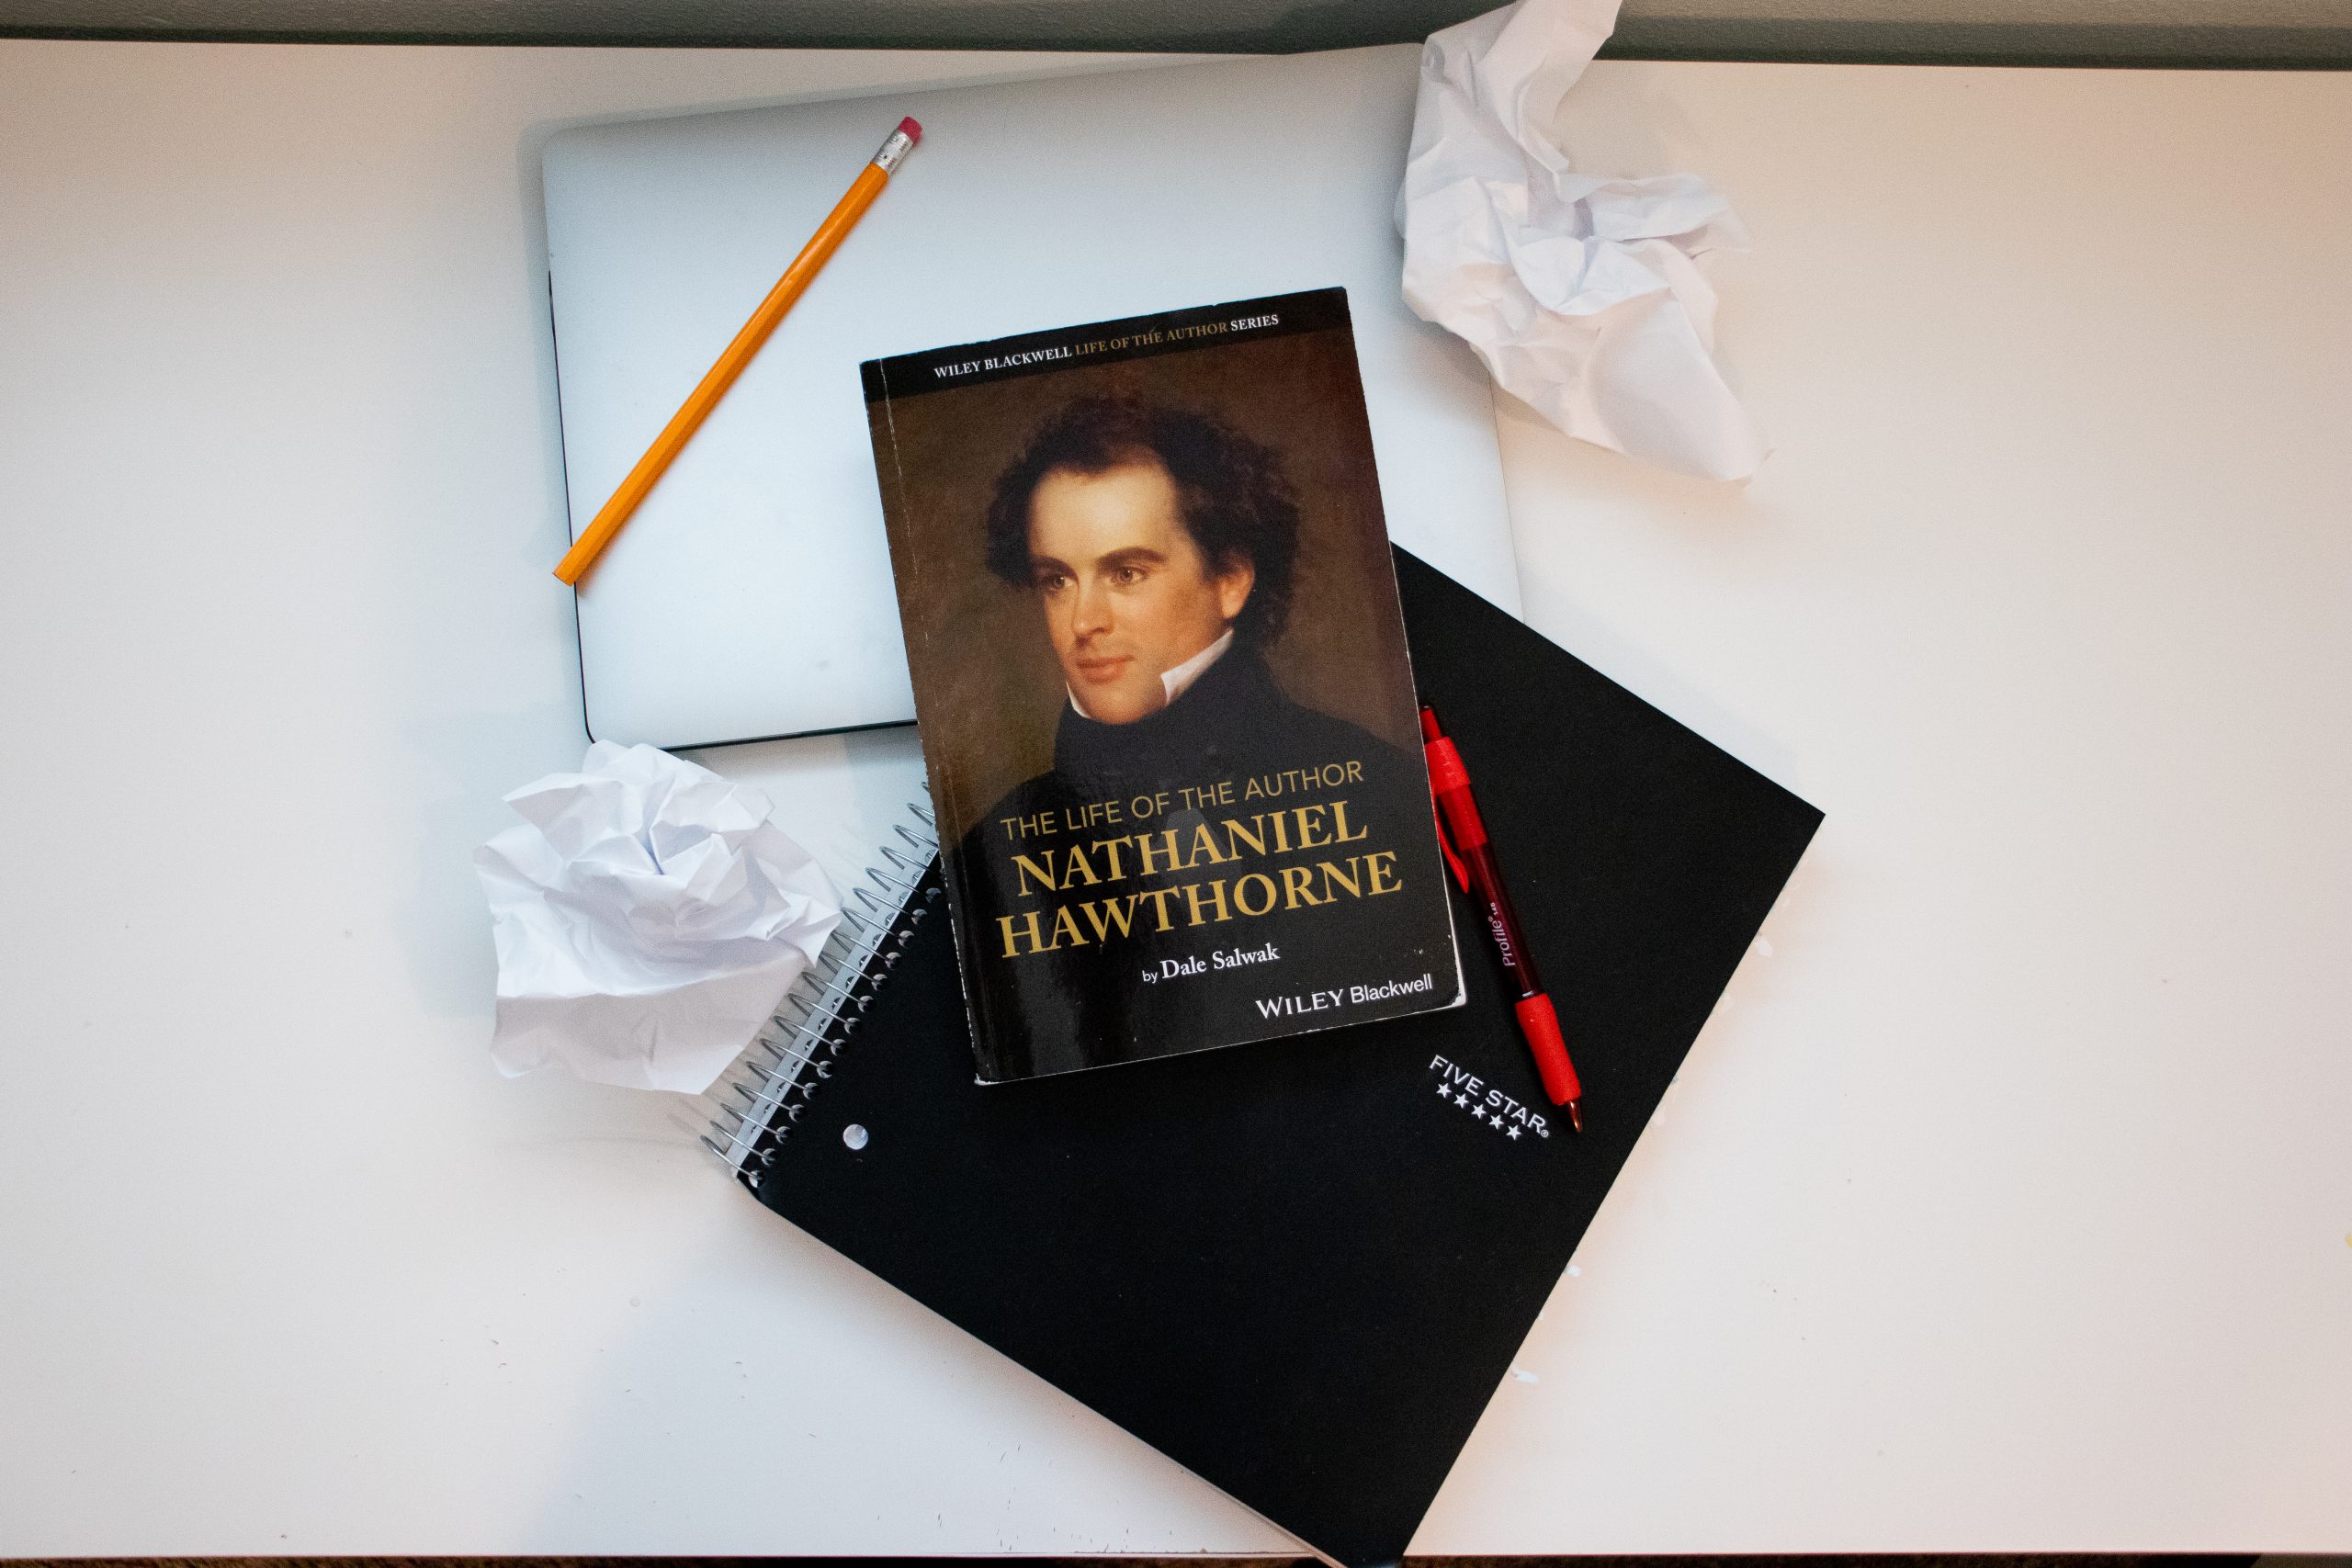 Dale Salwak publishes his new book, “The Life of Nathaniel Hawthorne”